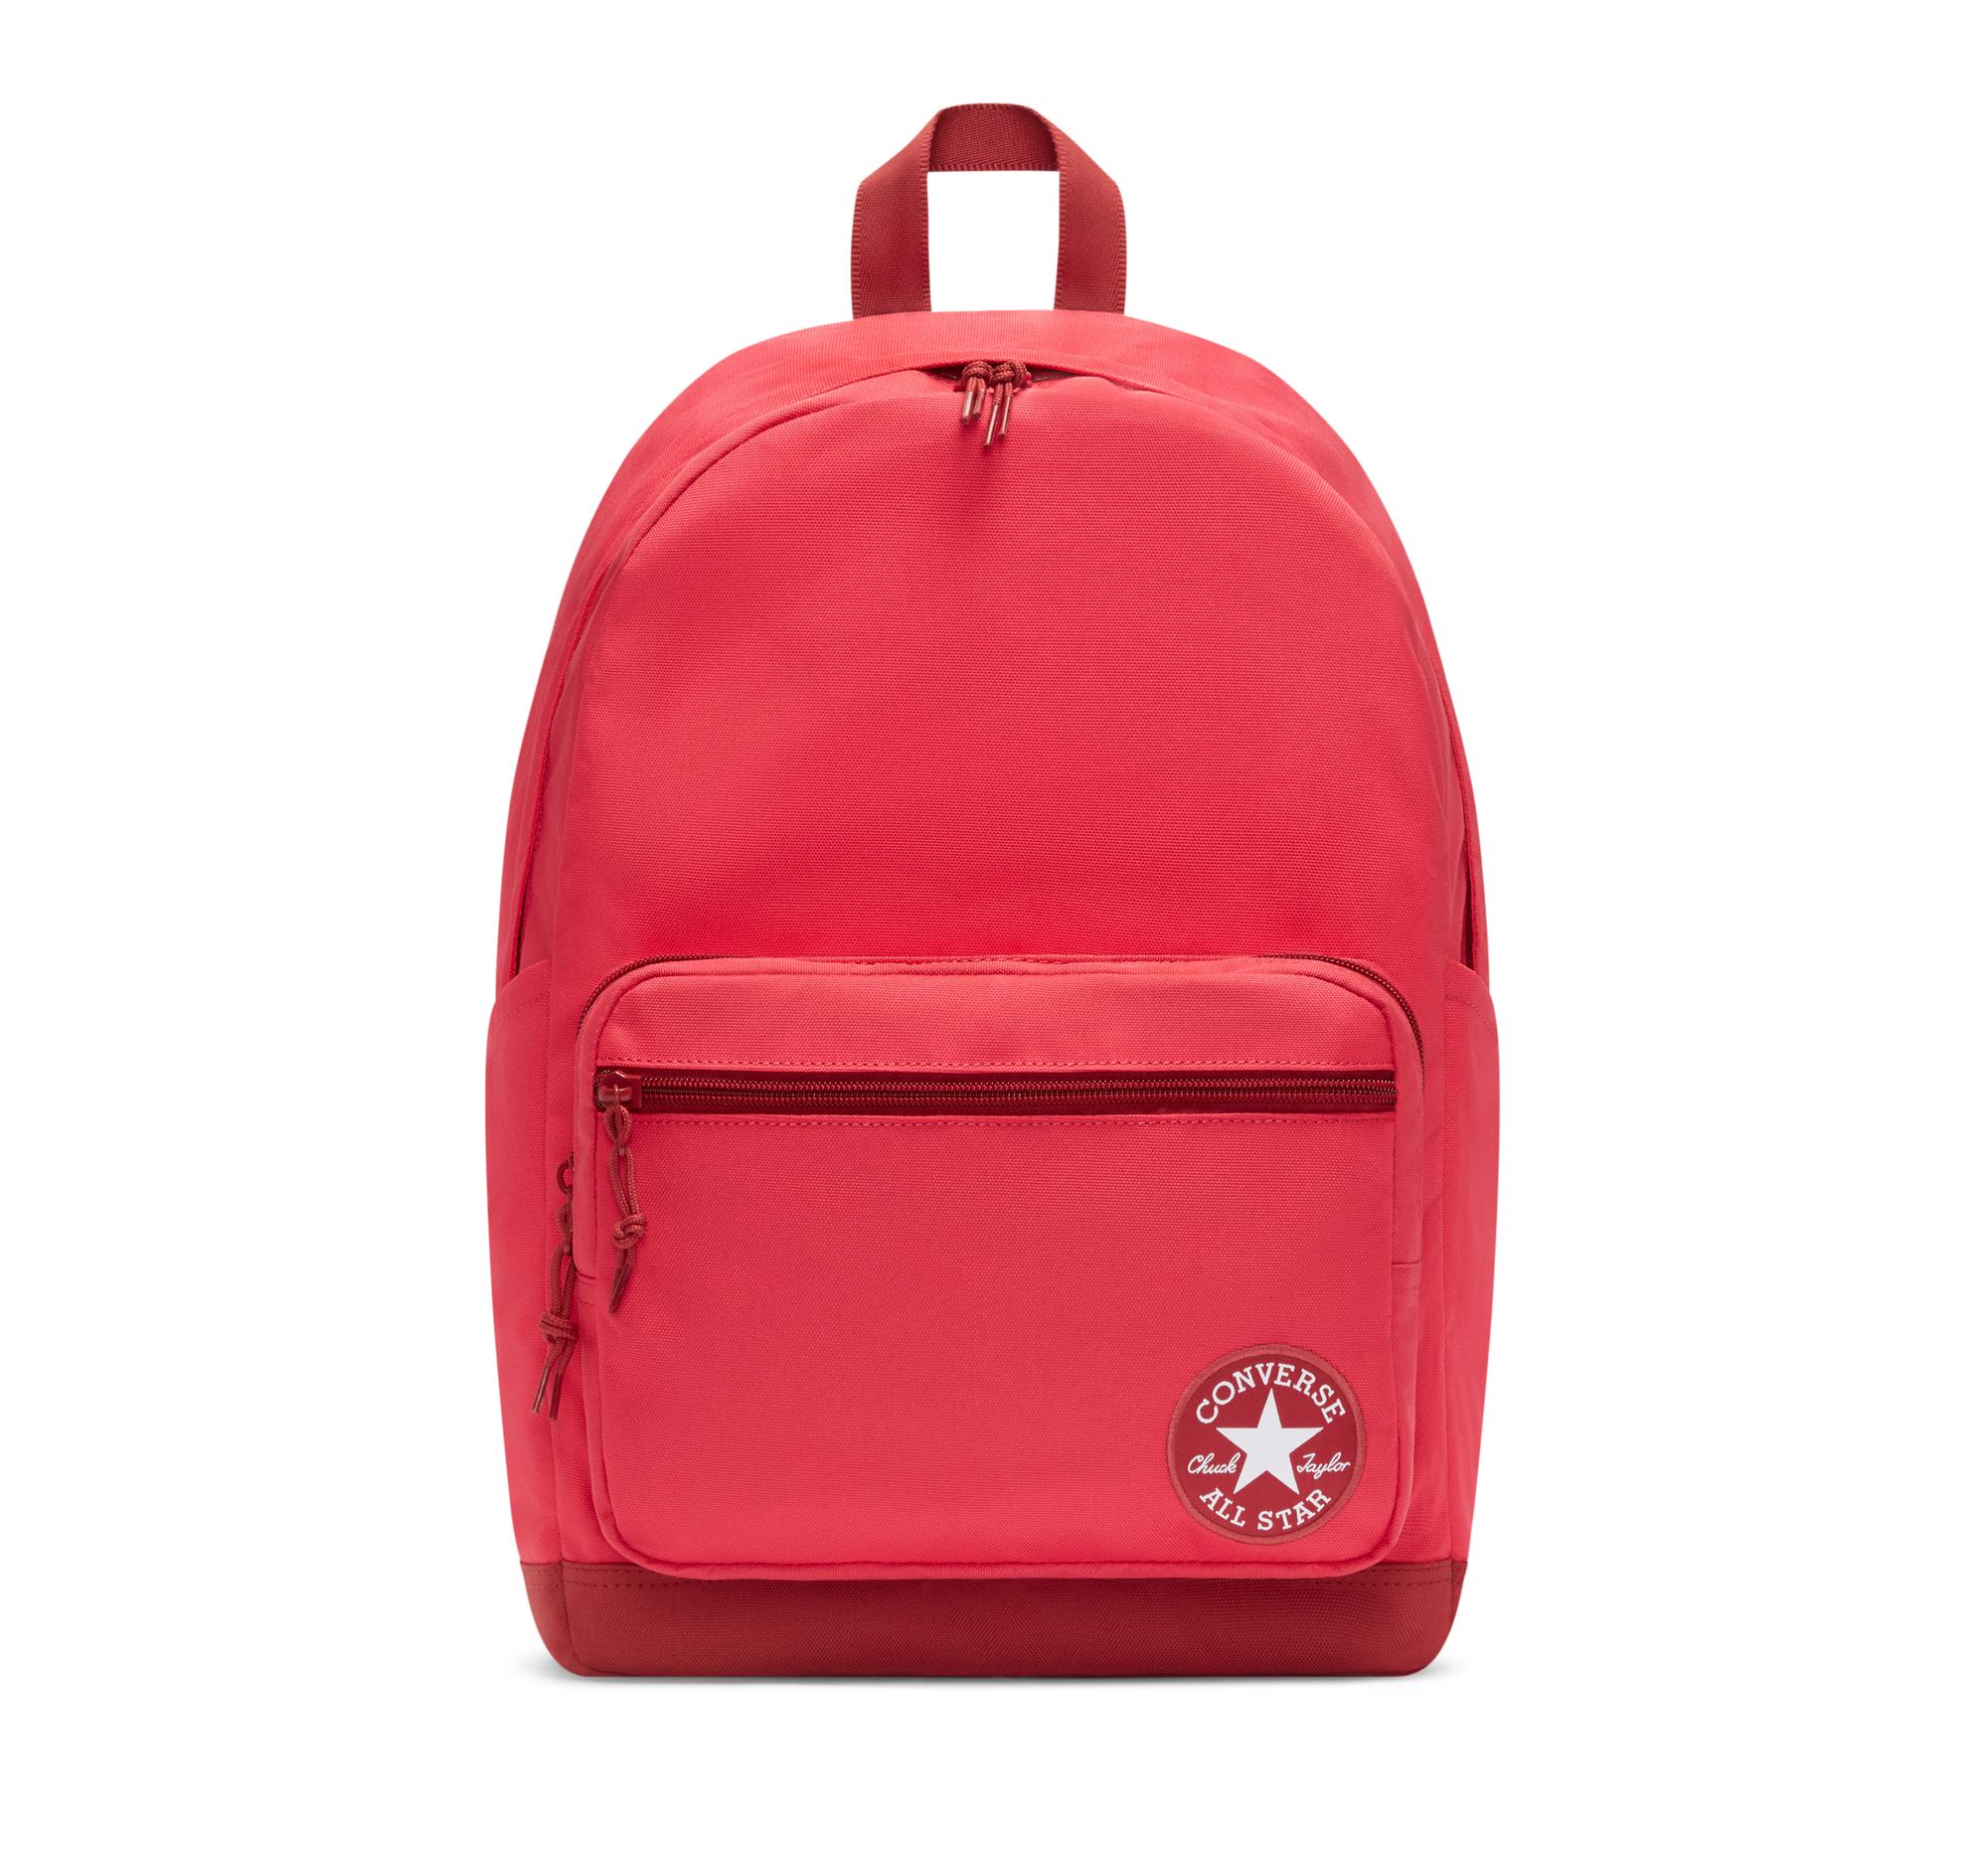 Converse Go 2 Backpack in Pink - Lyst